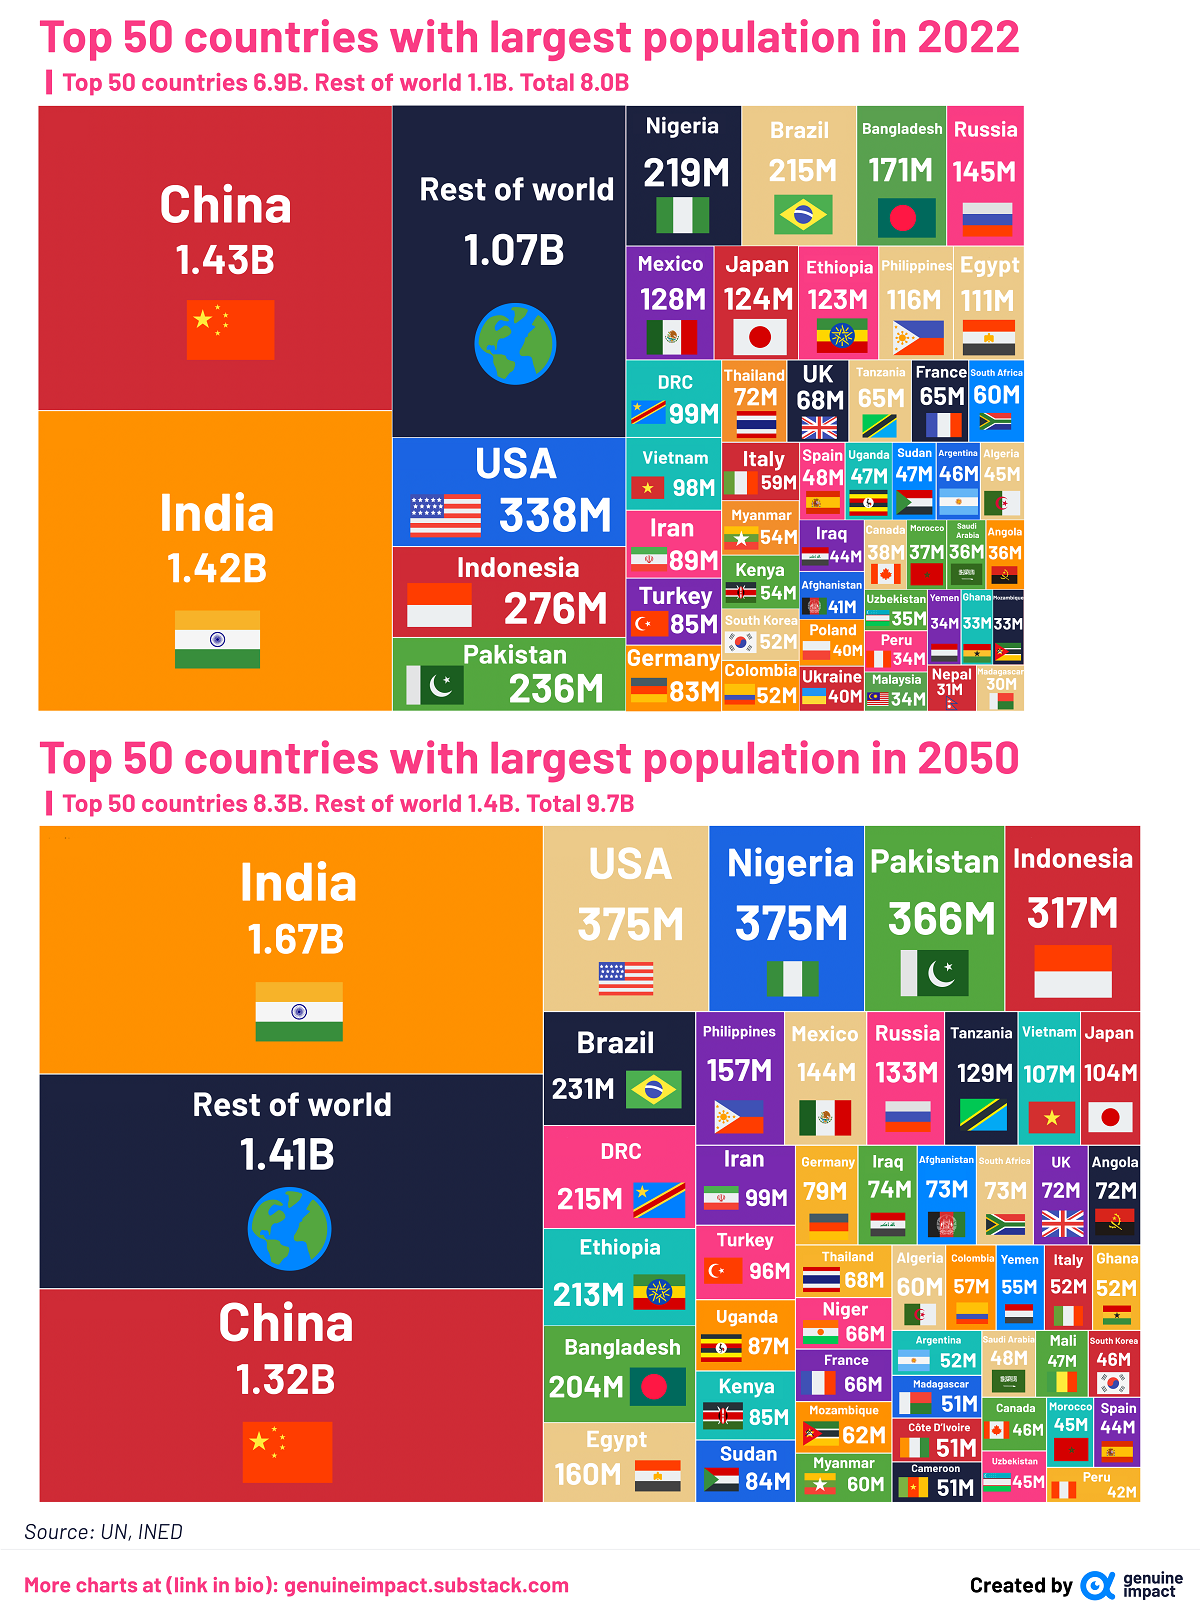 Top 50 countries with largest population in 2050